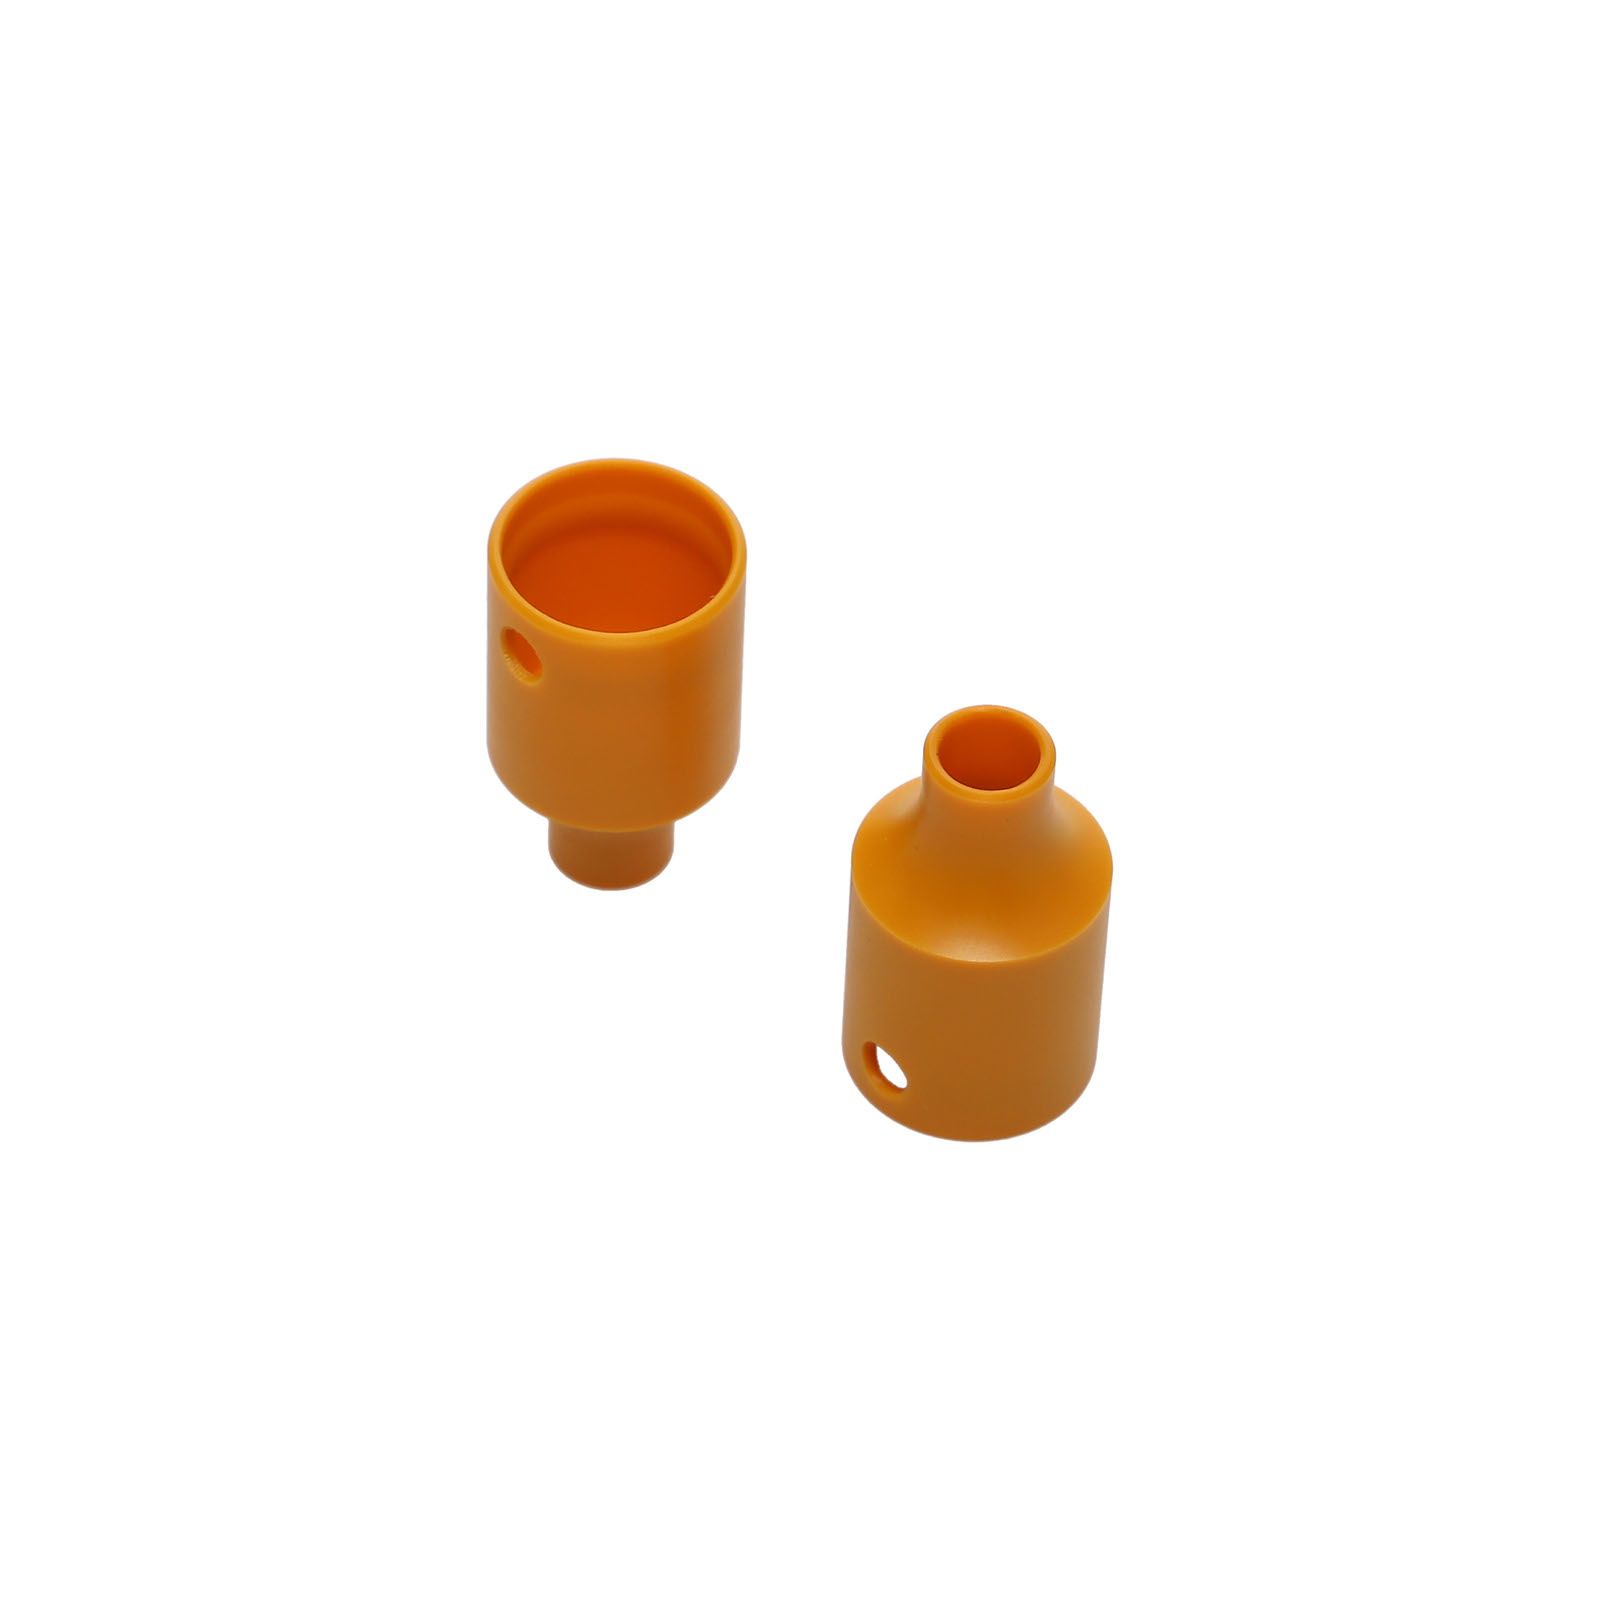 Spare sleeve set-for 4027127240-R-2pcs product photo